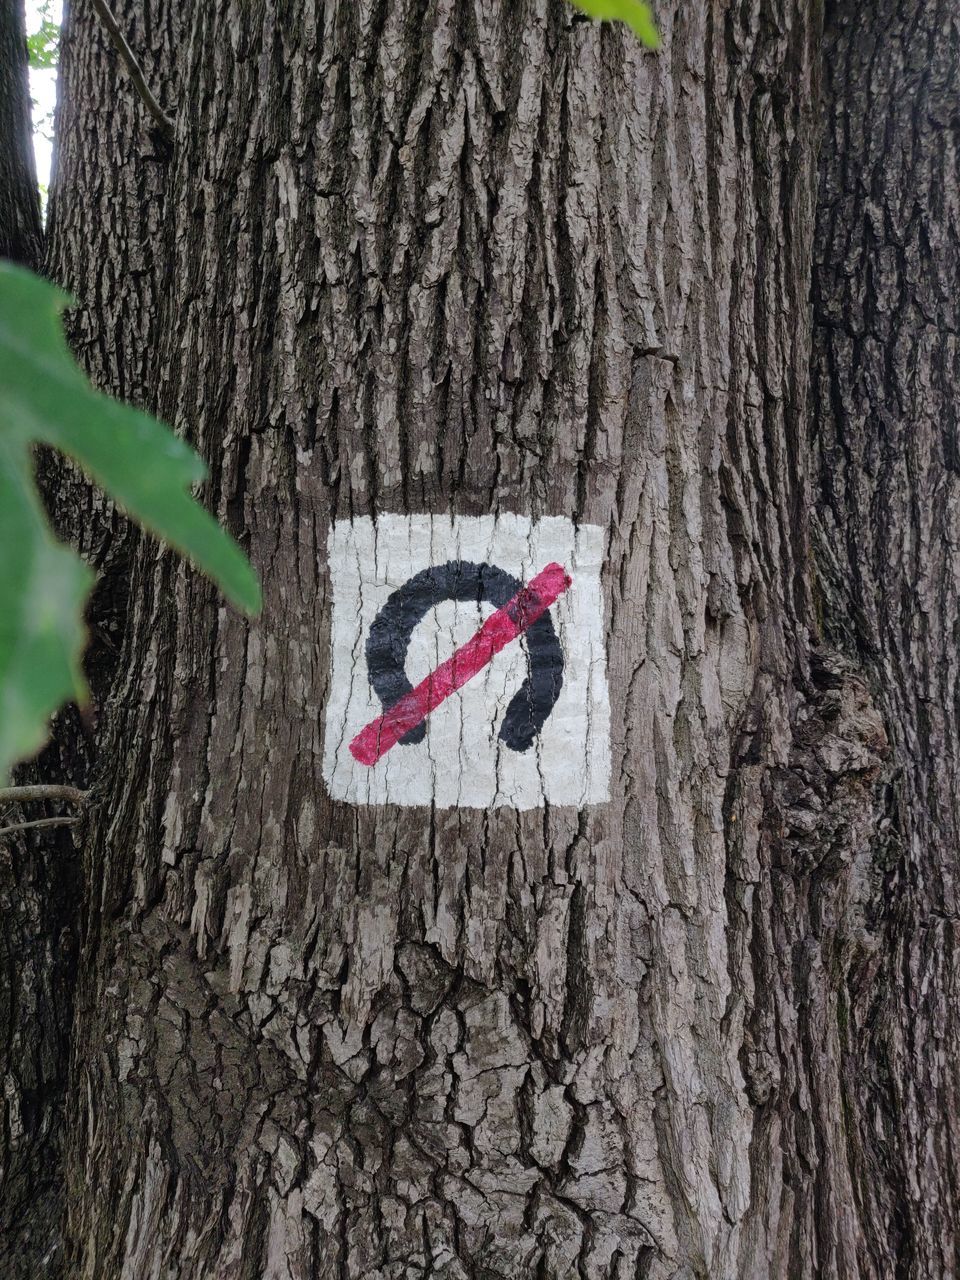 CLOSE-UP OF SIGN ON TREE TRUNK AGAINST PLANTS